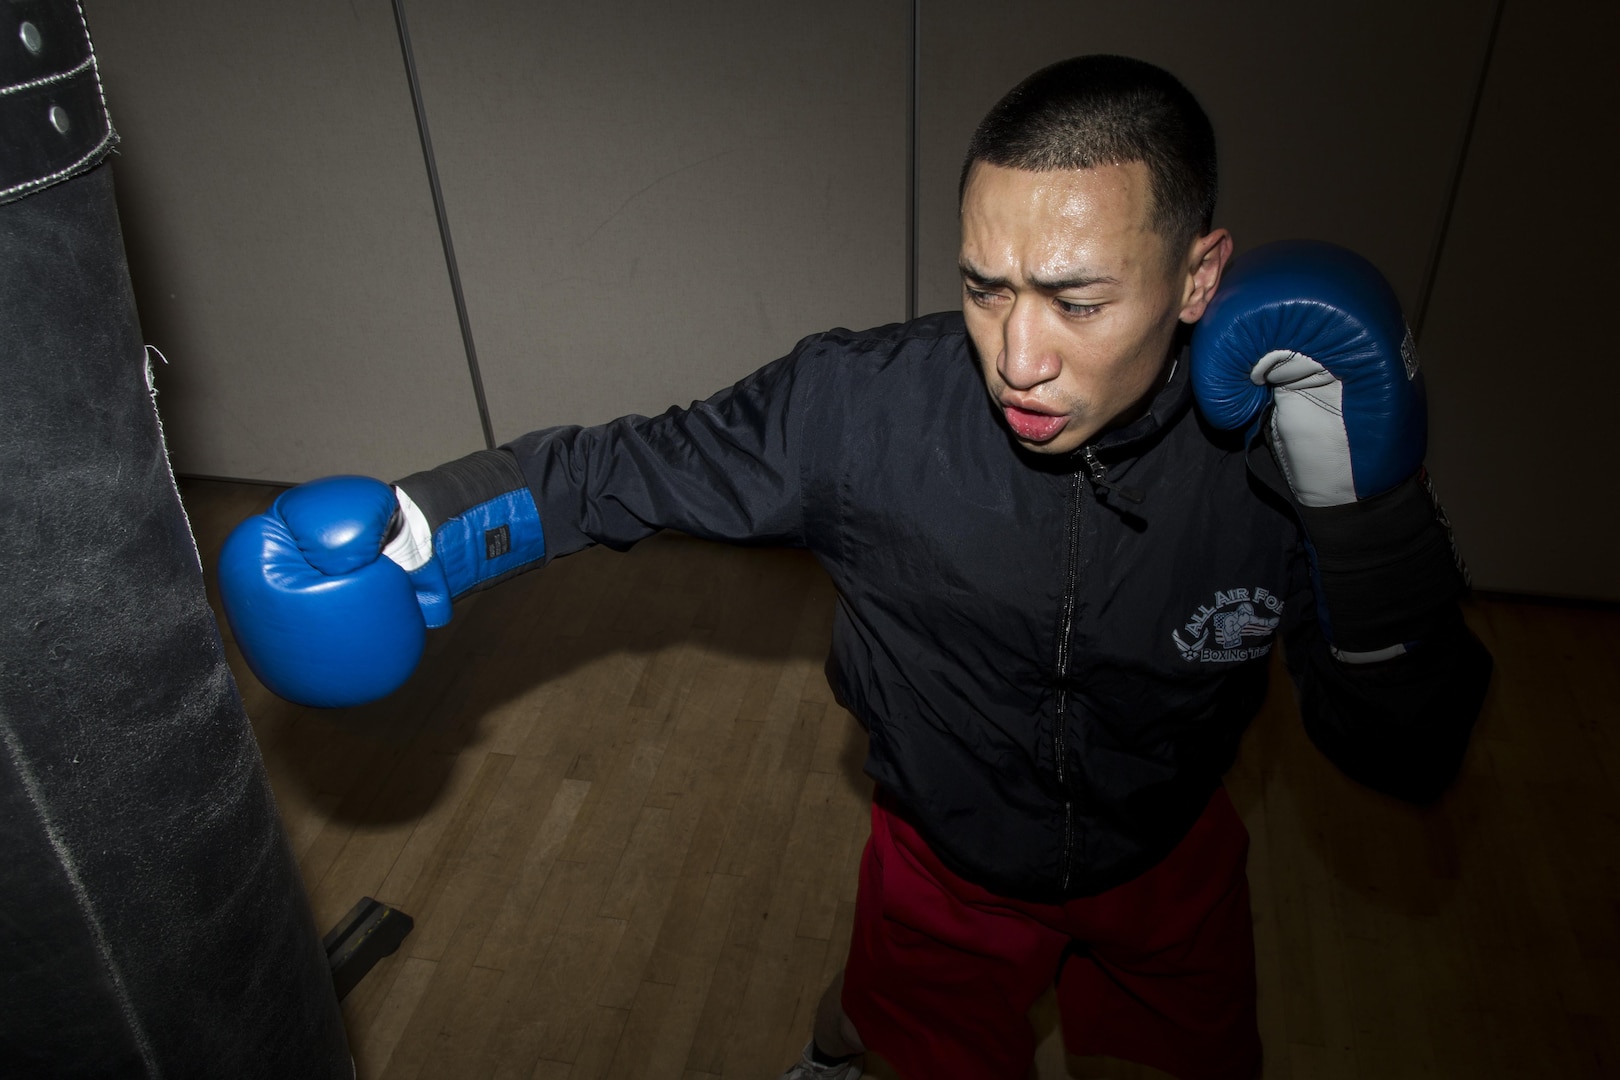 Senior Airman Dustin Southichack, 902nd Security Forces Squadron entry controller, performs heavy bag drills Jan. 5, 2015 at the Joint Base San Antonio-Randolph Rambler Fitness Center. Southichack has competed on the Air Force Boxing Team since 2012, and his goals include retiring from the Air Force Reserves and becoming a boxing world champion. (U.S. Air Force photo by Senior Airman Alexandria Slade)
